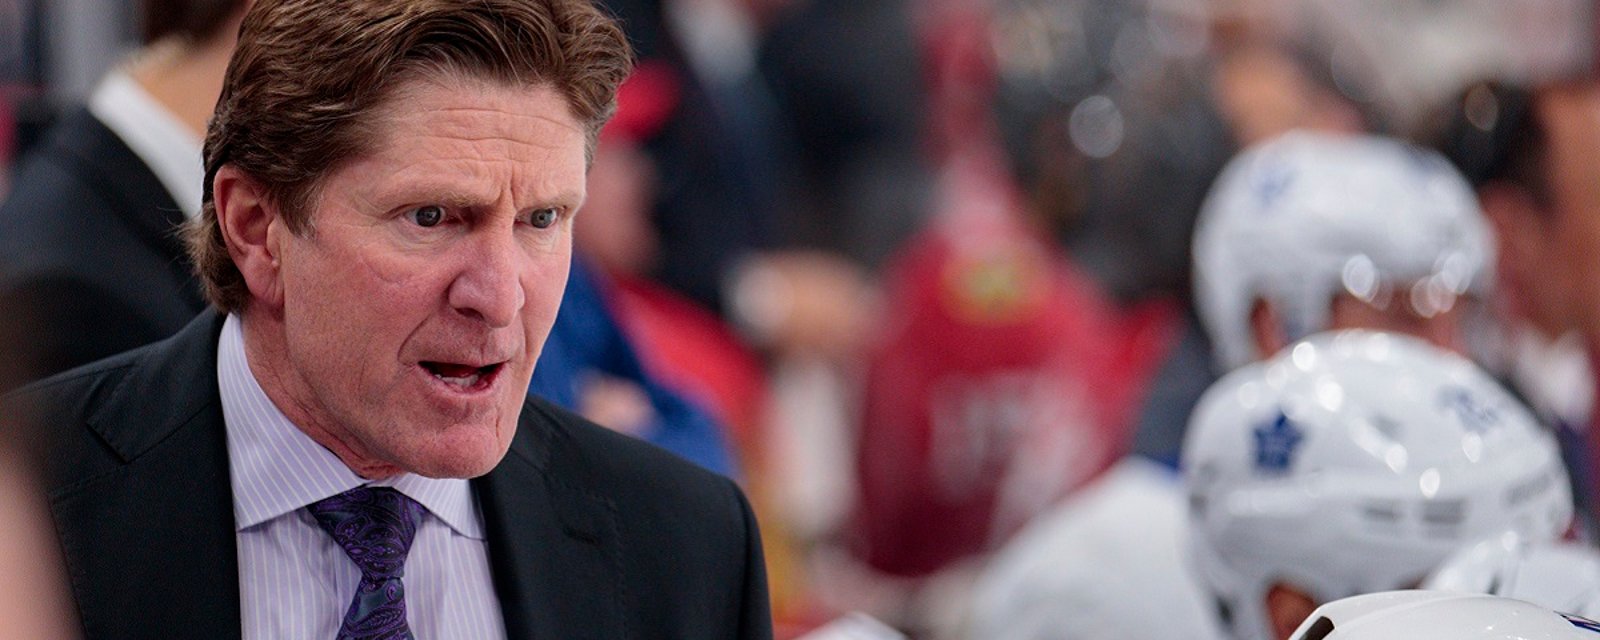 Leafs head coach Mike Babcock comes to the defense of Islanders' fans.